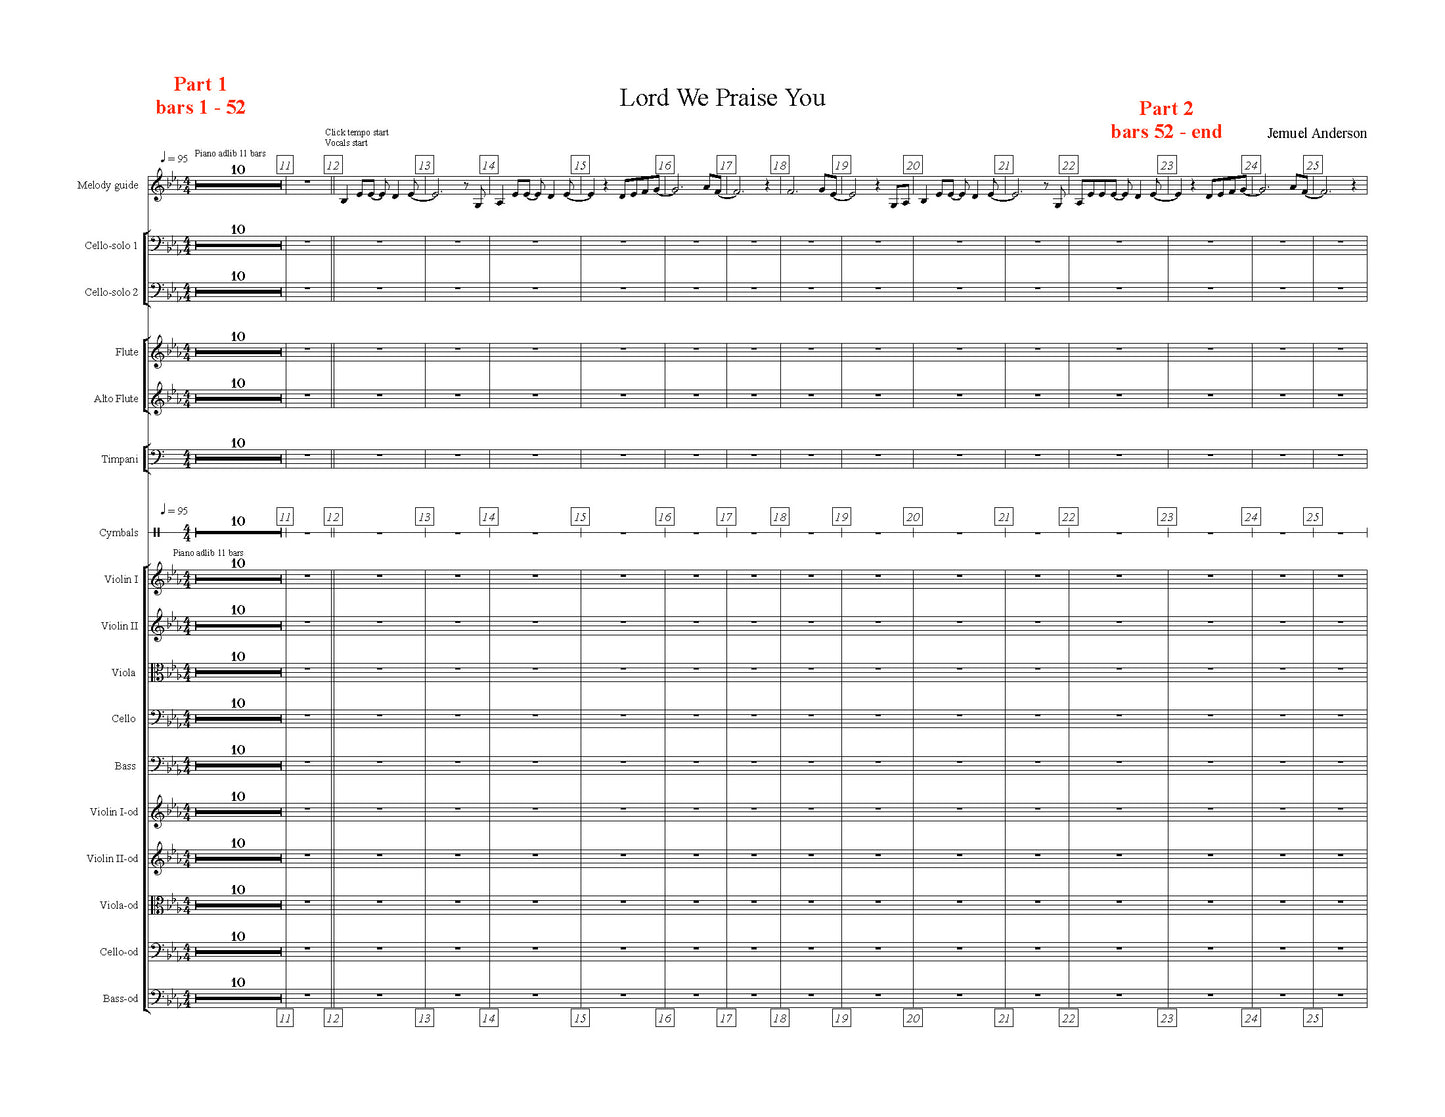 "Lord We Give You Praise" By Jemuel Anderson (Orchestral Score)